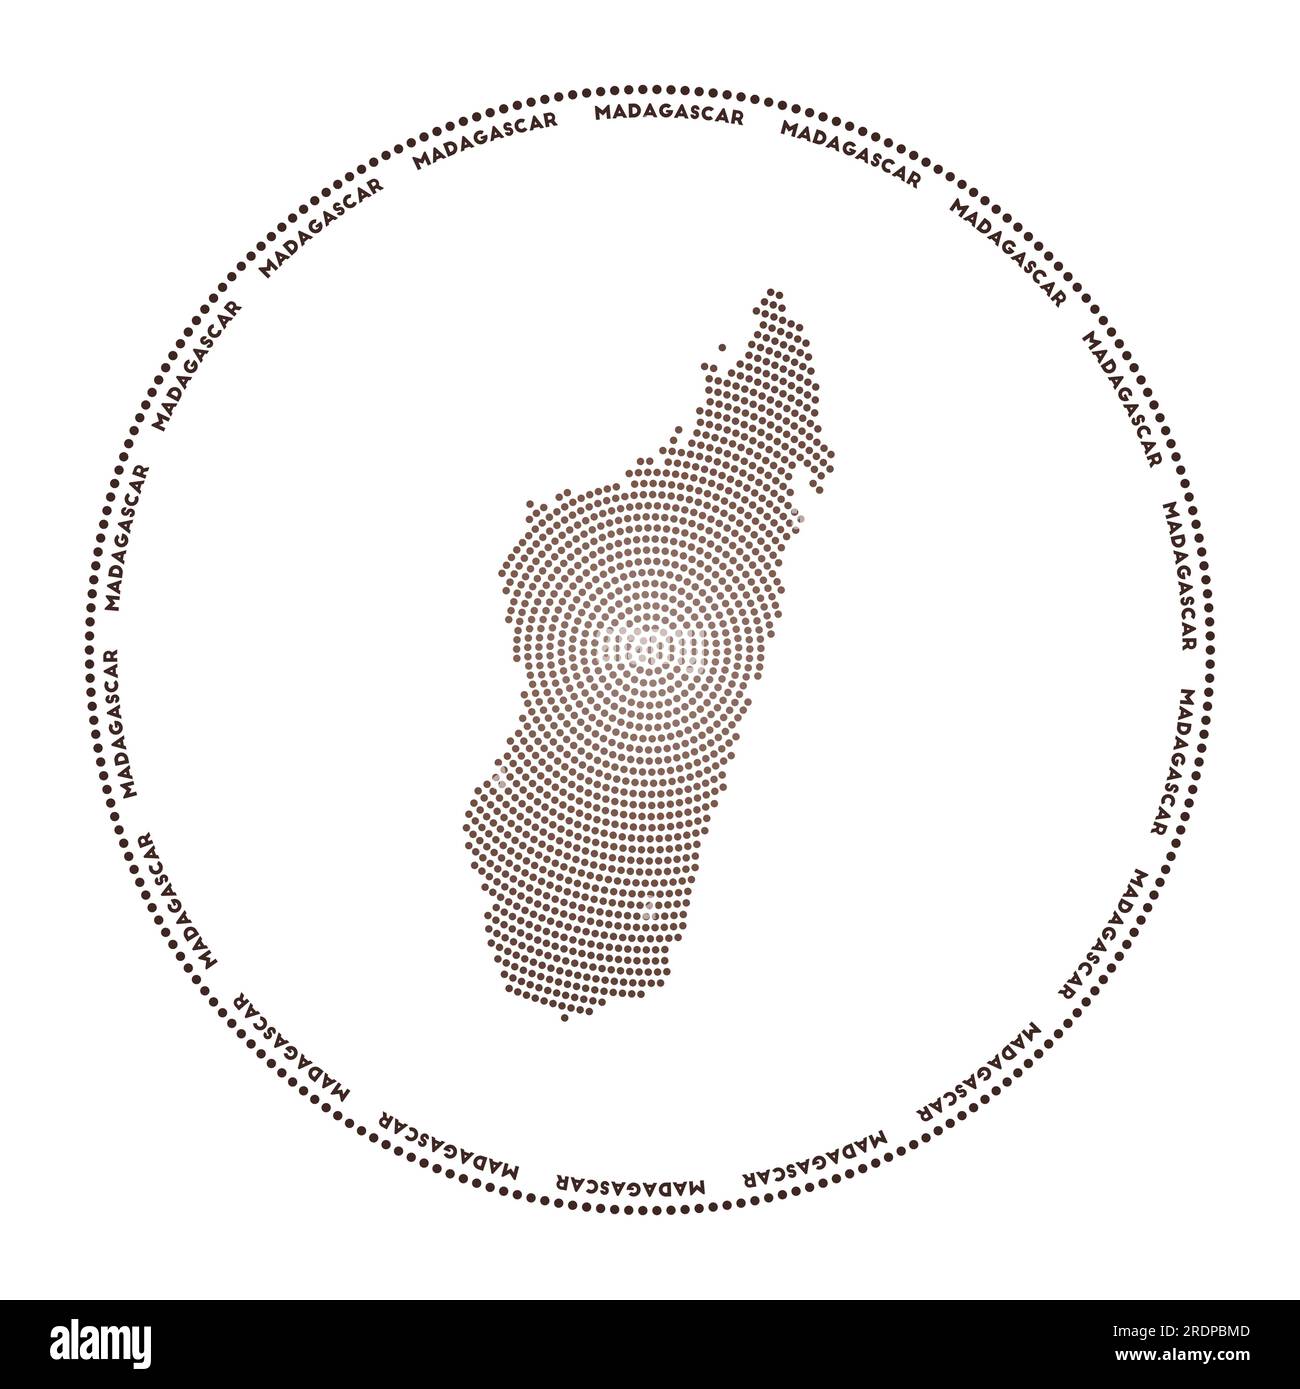 Madagascar round logo. Digital style shape of Madagascar in dotted circle with country name. Tech icon of the country with gradiented dots. Neat vecto Stock Vector